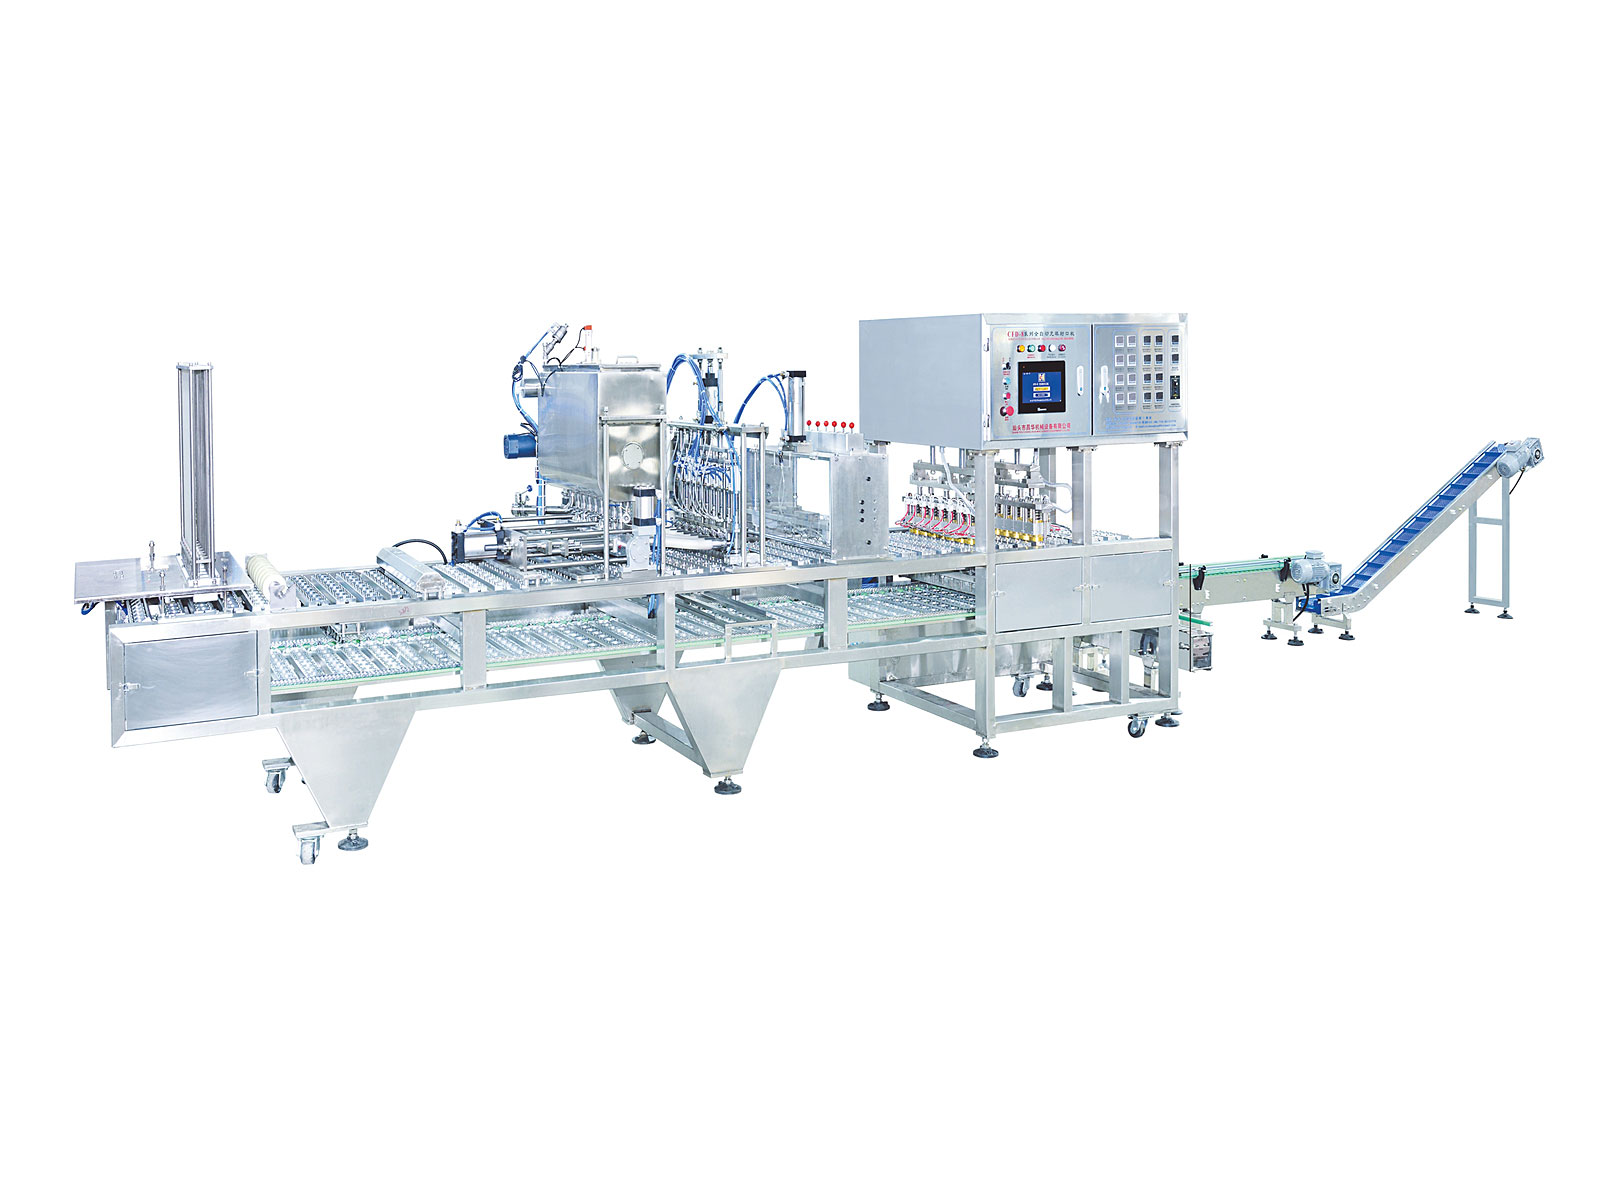  Sauce automatic flling single film sealing machine(Economic type- step-by-step drive)